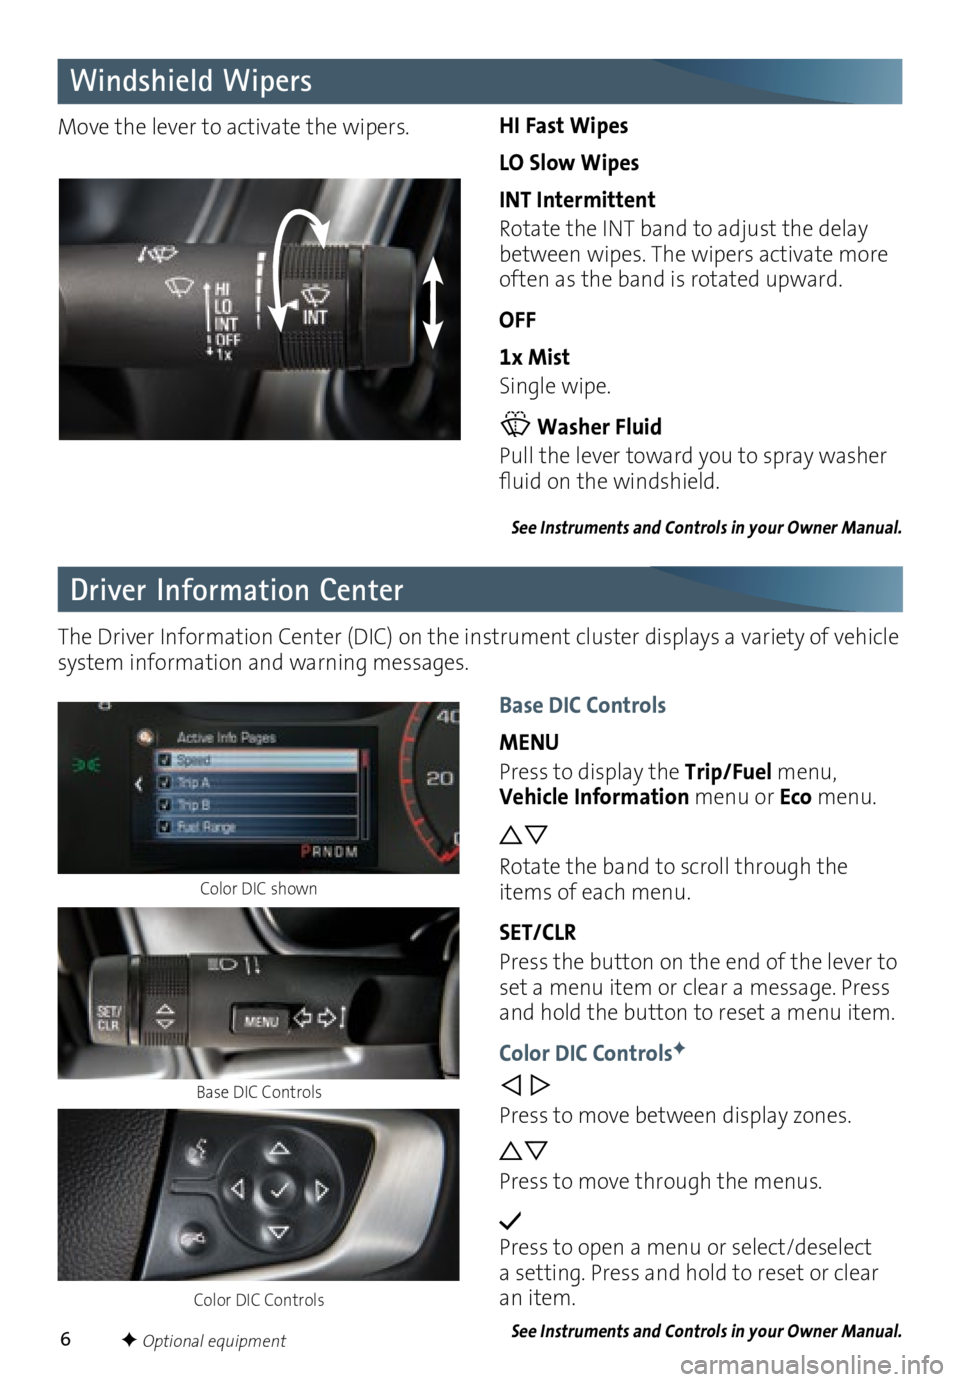 GMC CANYON 2016  Get To Know Guide 6
Driver Information Center Windshield Wipers
The Driver Information Center (DIC) on the instrument cluster displays a variety of vehicle 
system information and warning messages.  Move the lever to a